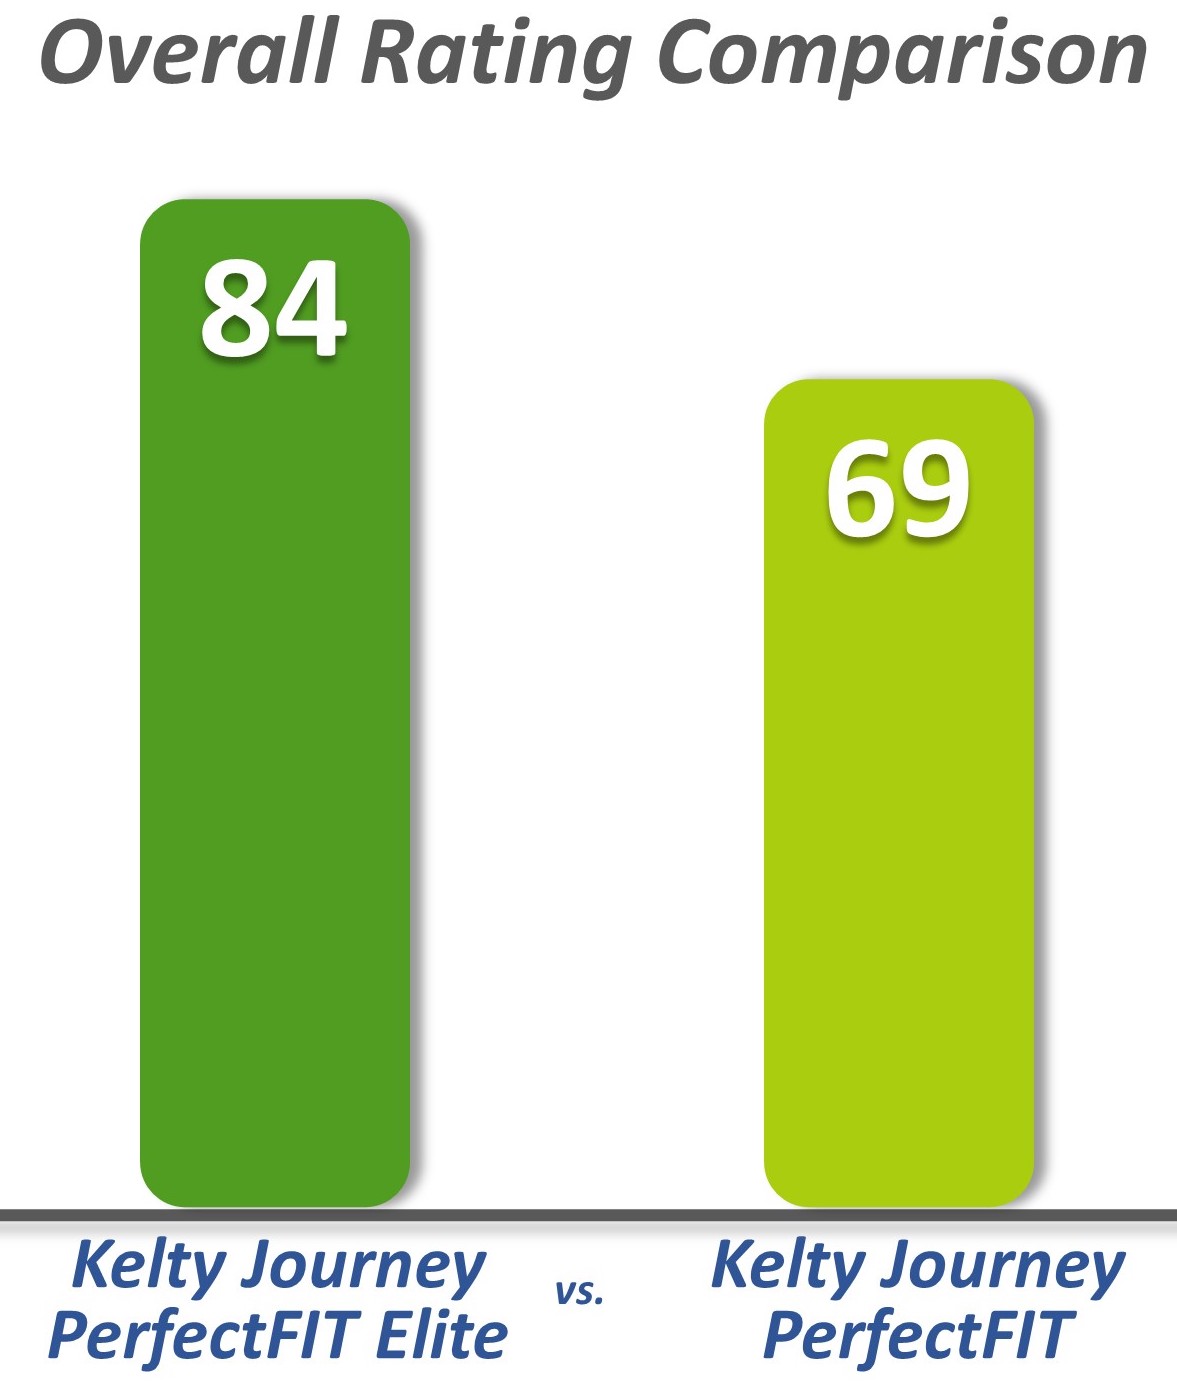 Kelty Journey PerfectFIT Elite vs Kelty Journey PerfectFIT overal rating comparison